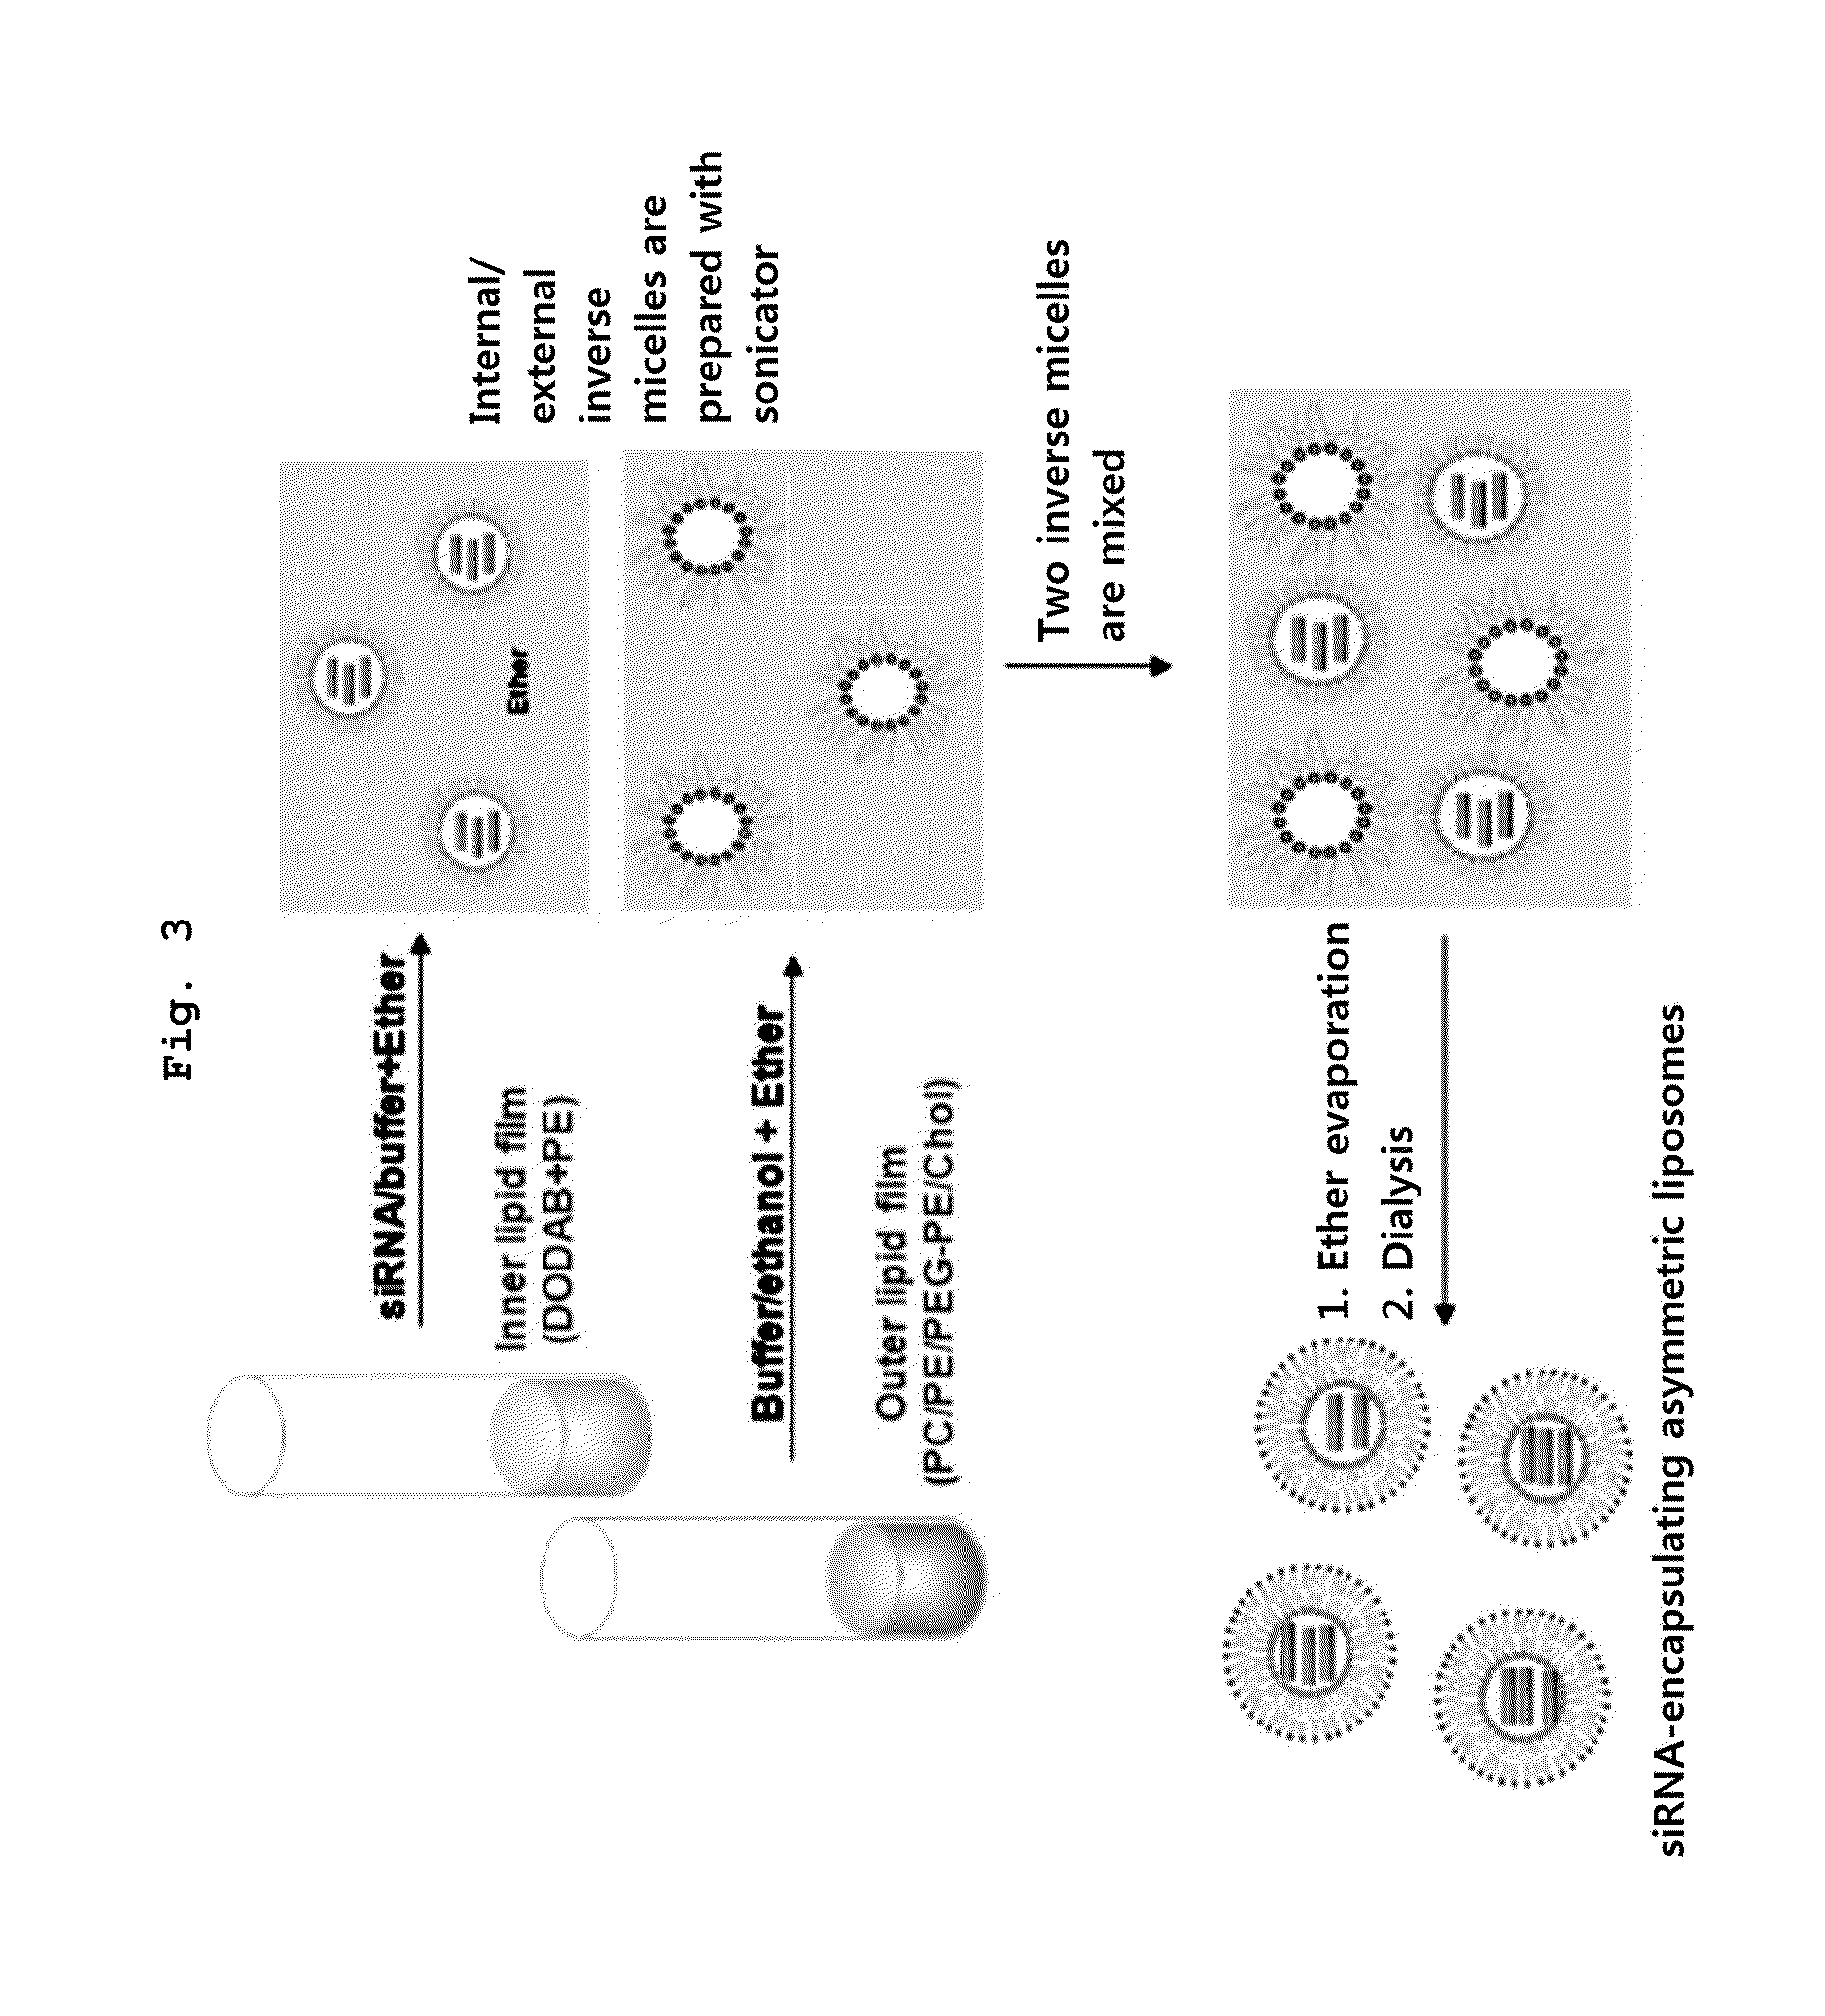 Asymmetric Liposomes for the Highly Efficient Encapsulation of Nucleic Acids and Hydrophilic Anionic Compounds, and Method for Preparing Same